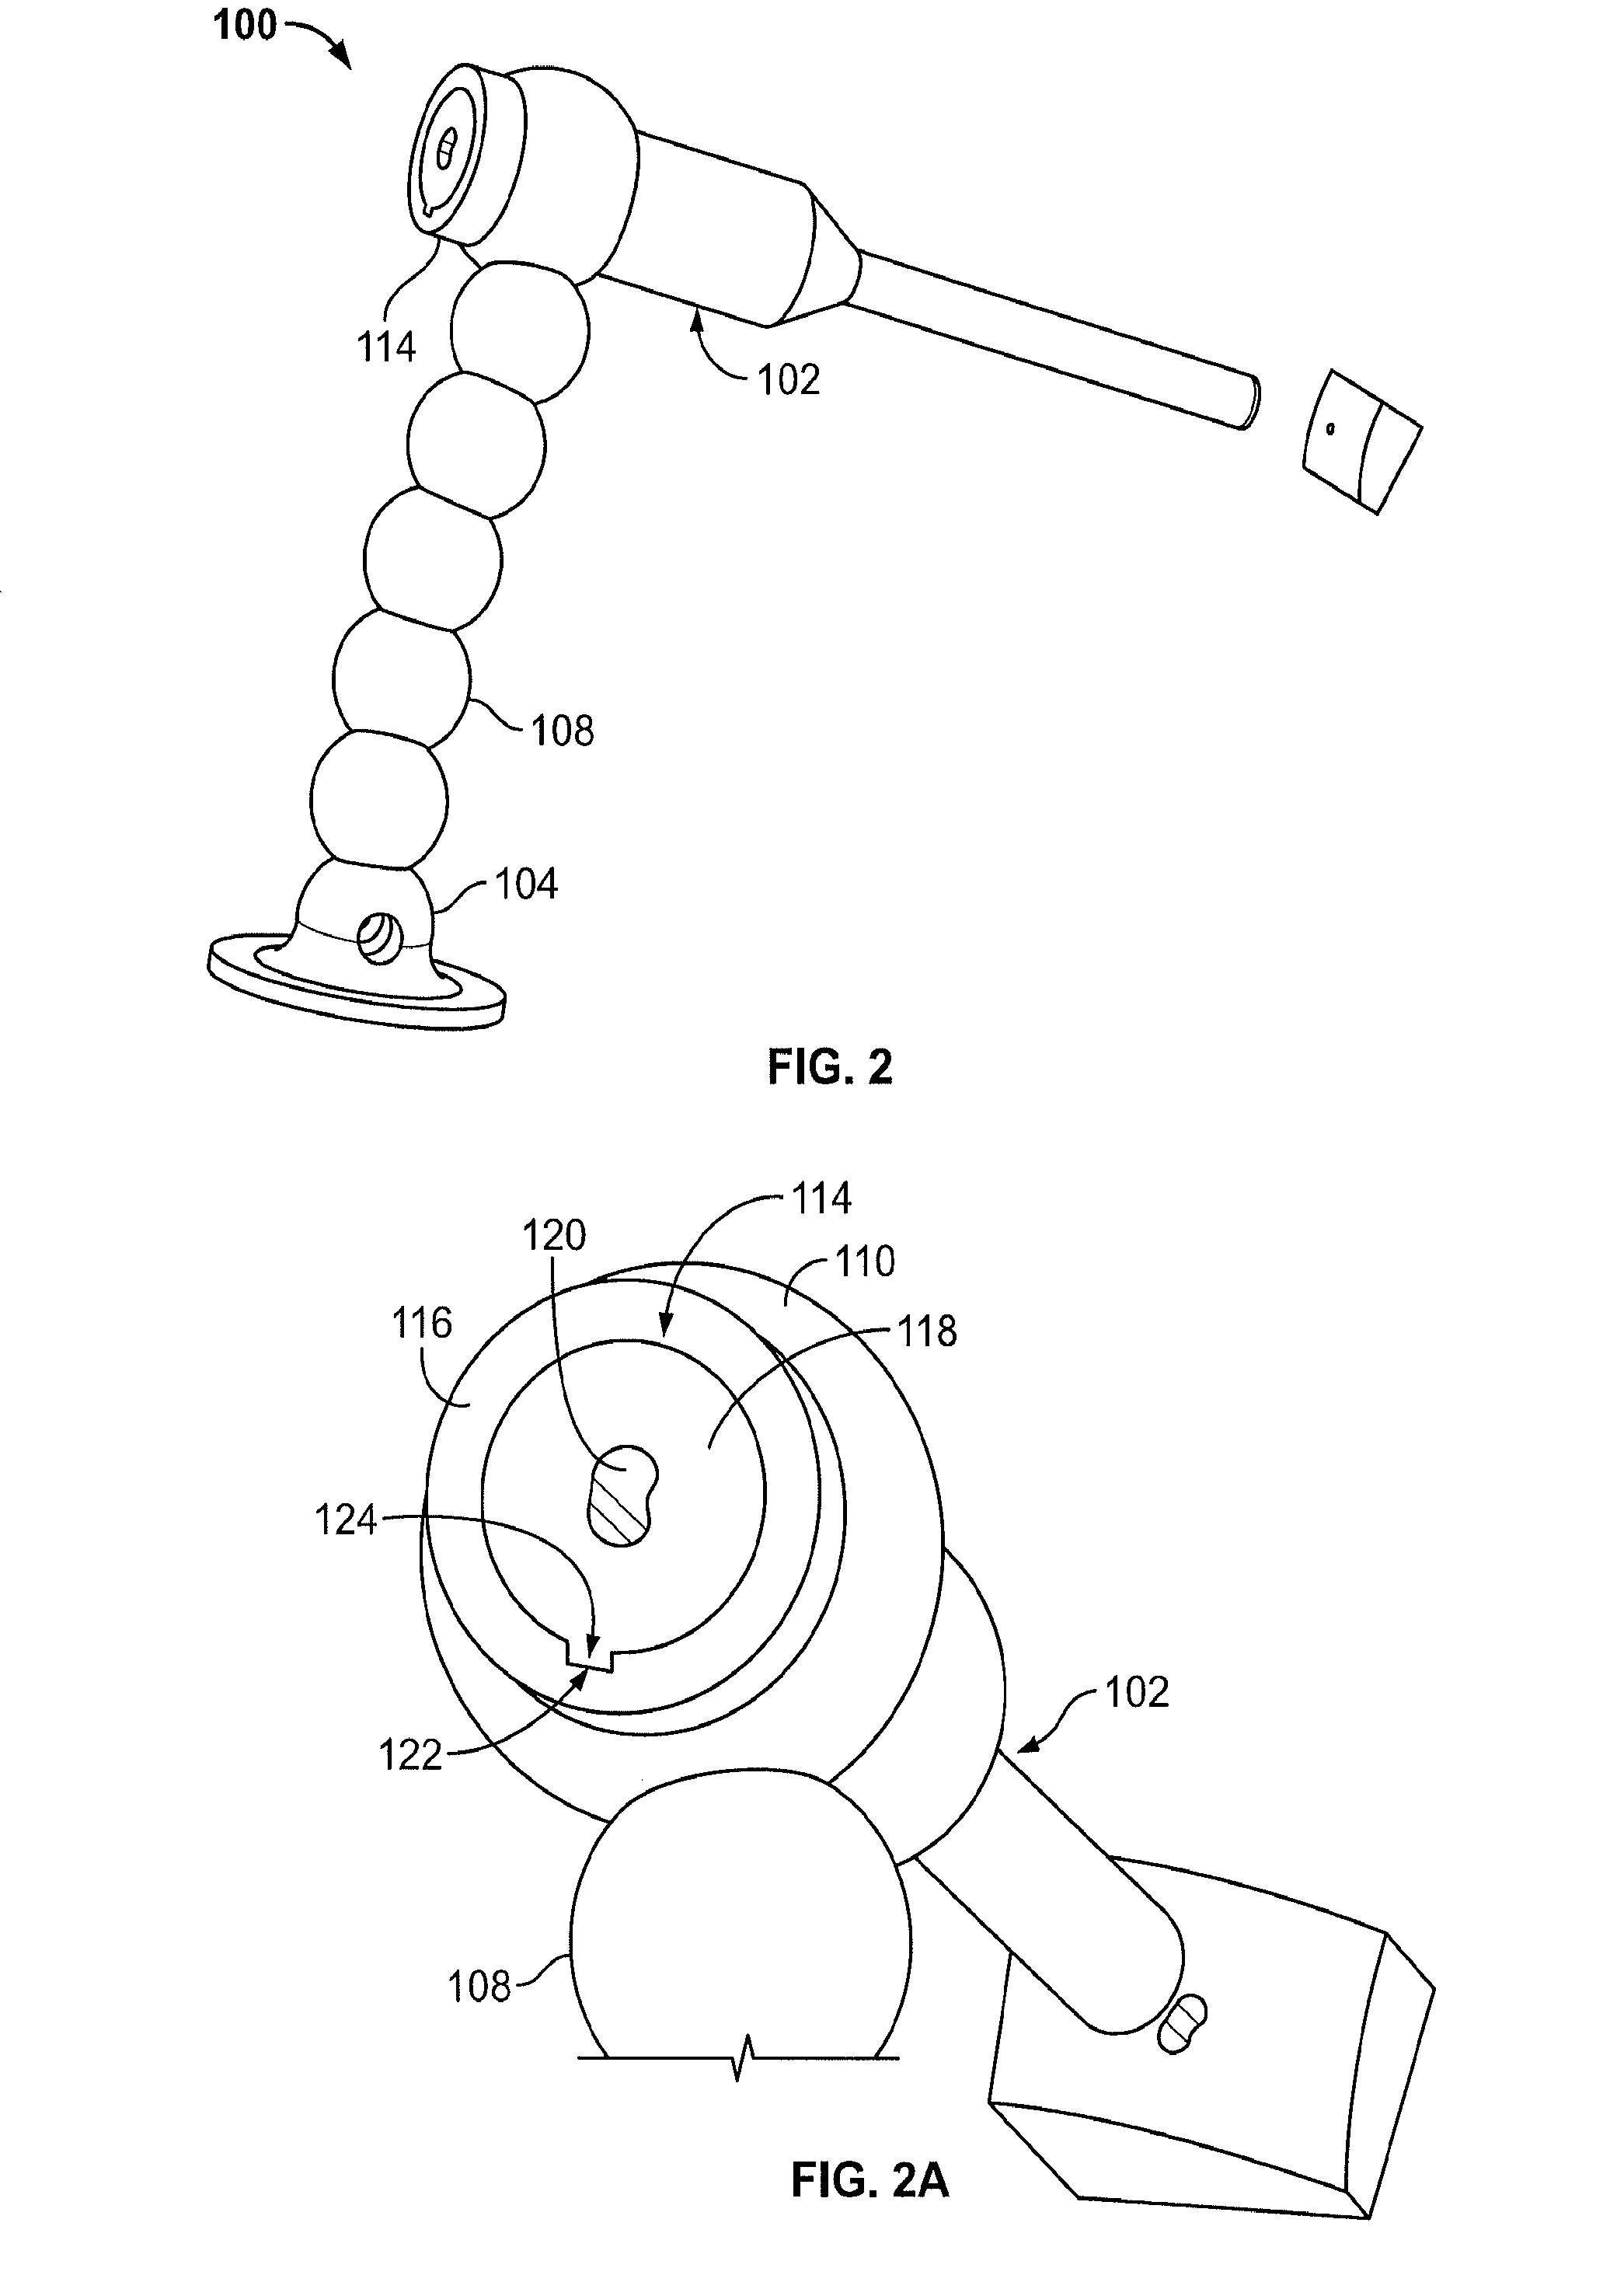 Instruments, Methods and Systems for Harvesting and Implanting Cartilage Material